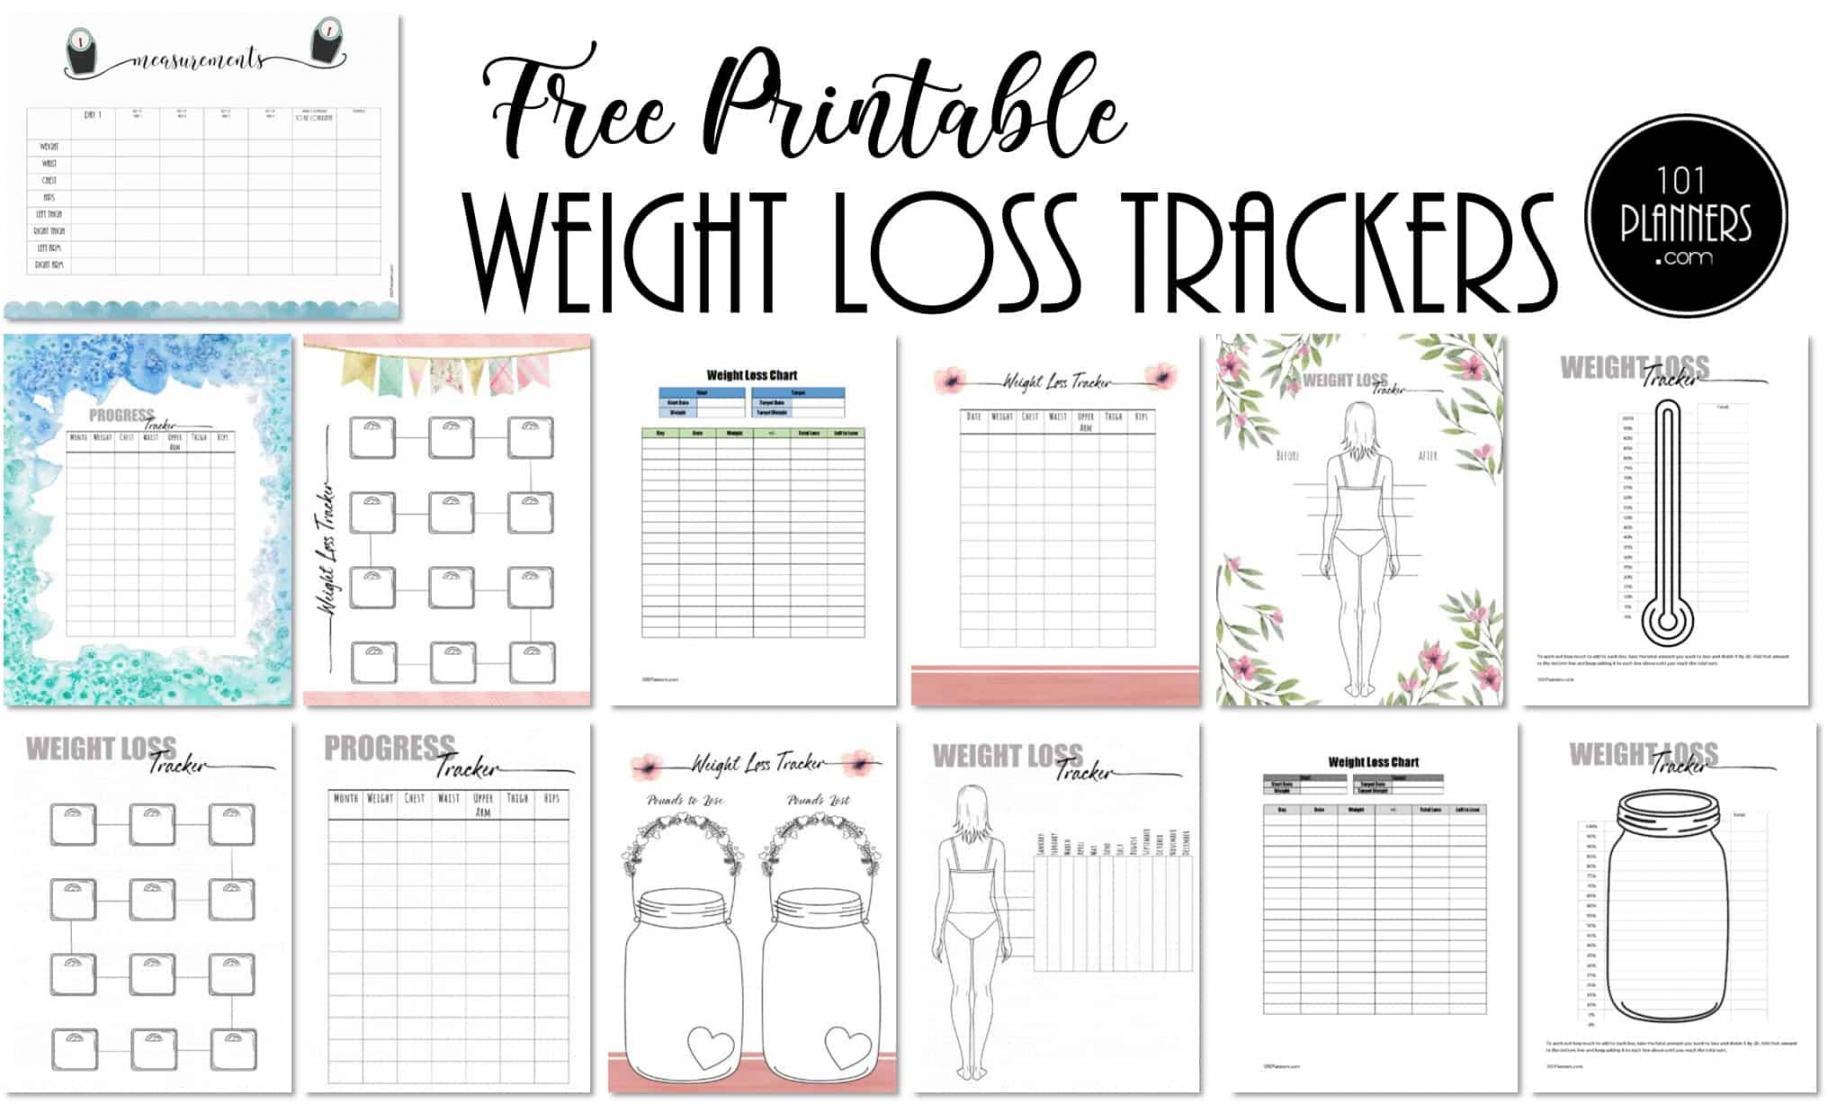 FREE Weight Loss Tracker Printable  Customize before you Print - FREE Printables - Free Printable Weight Loss Journal